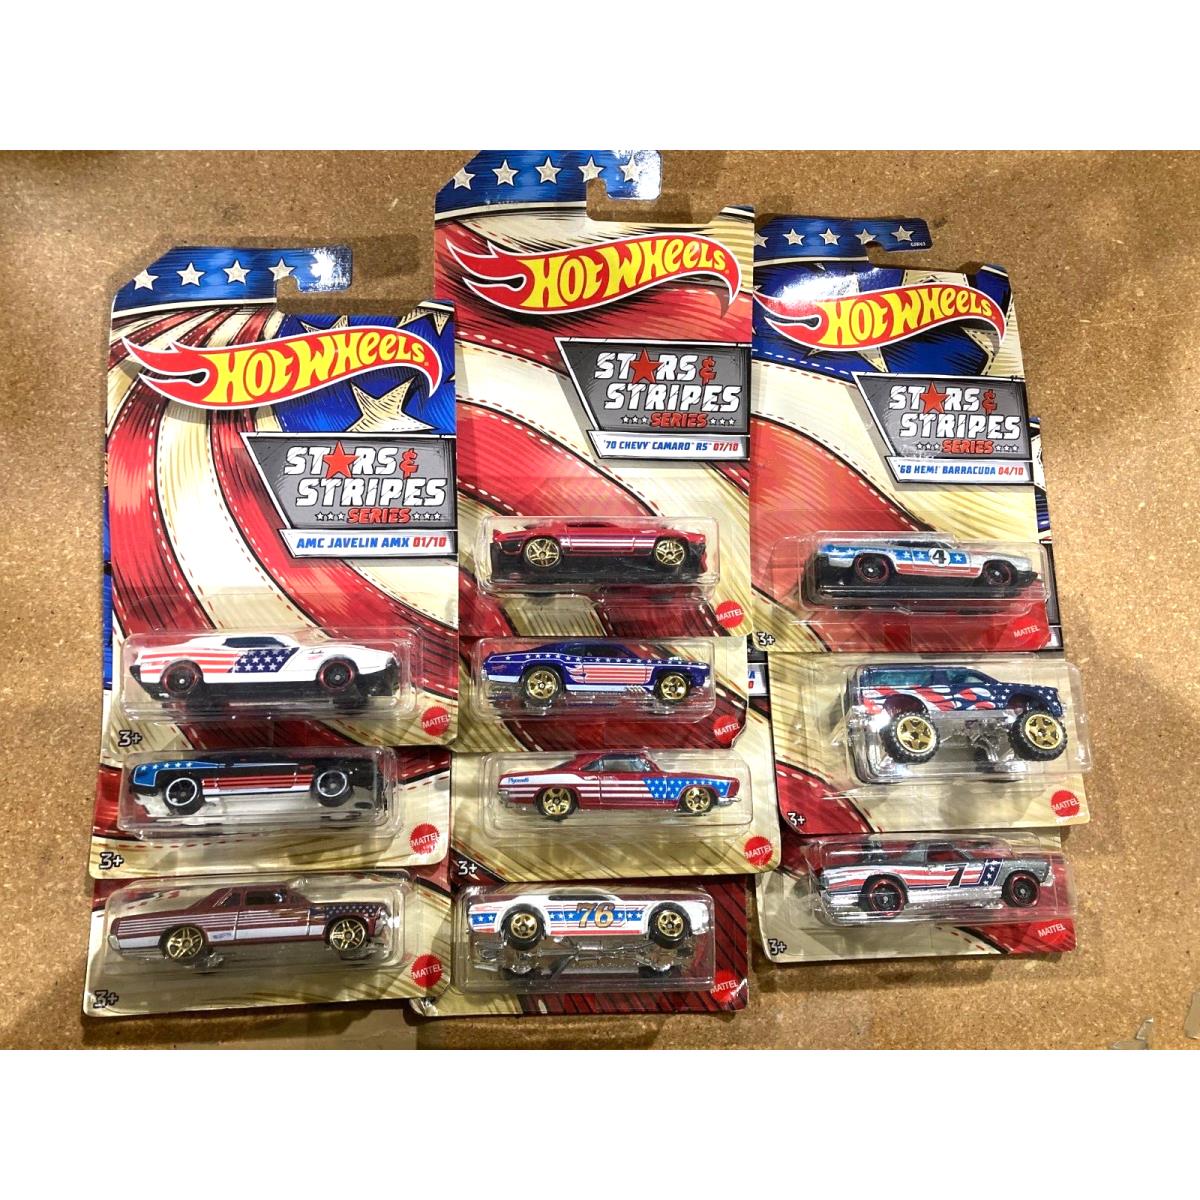 HW 2019 Stars and Stripes Complete 10 Car Set -some Cracked Cases